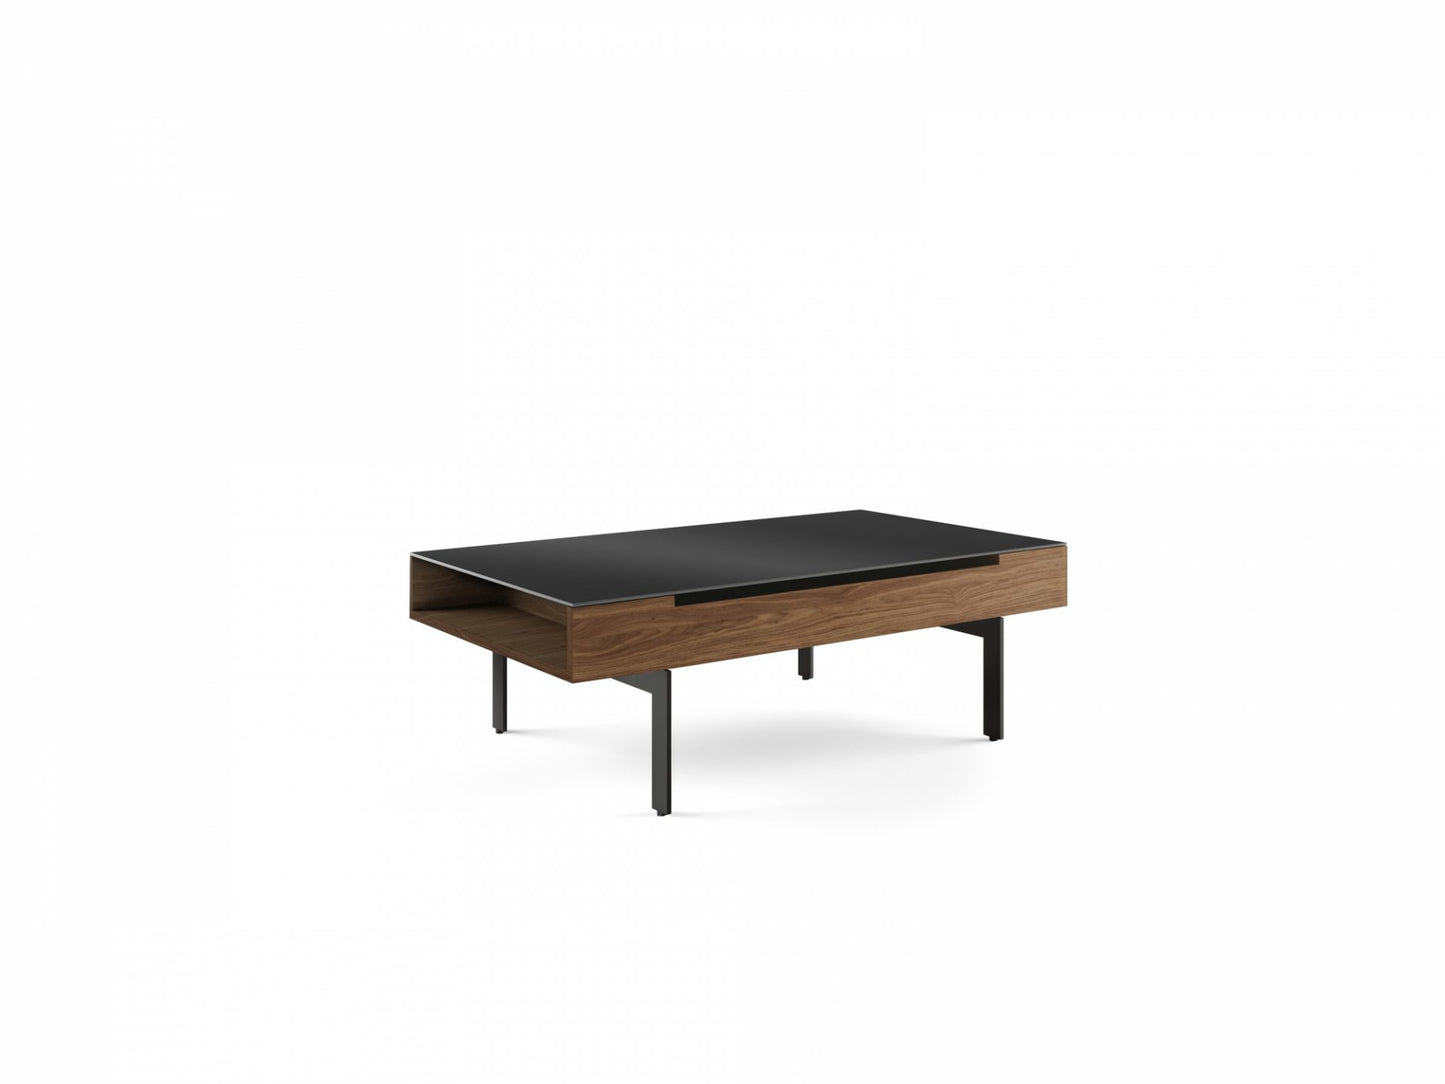 Reveal Lift Top Coffee Table